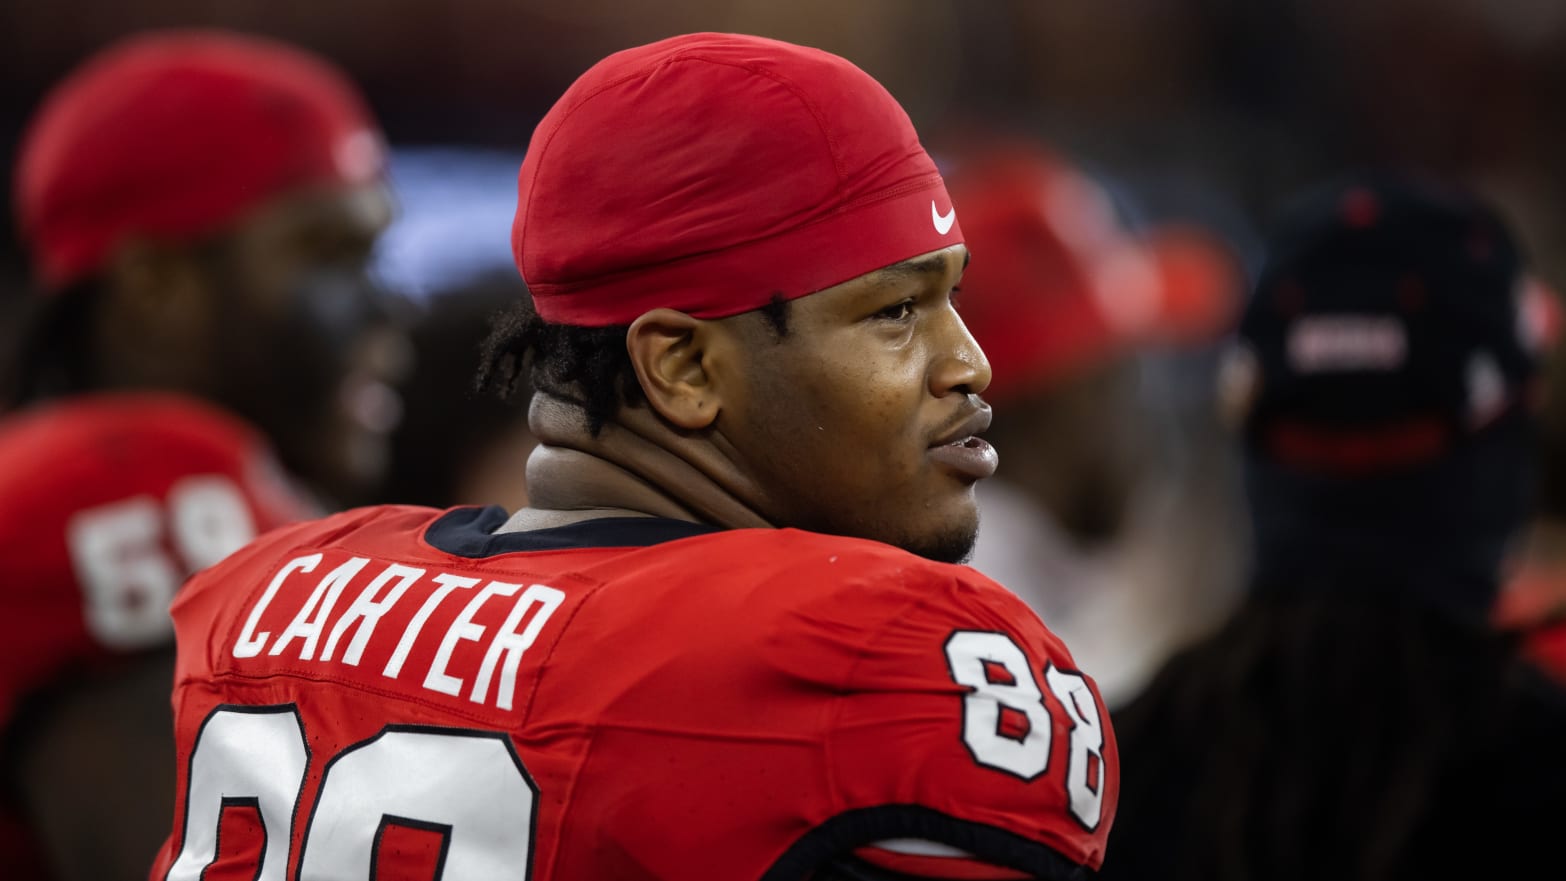 UGA football star Jalen Carter charged in connection to deadly crash